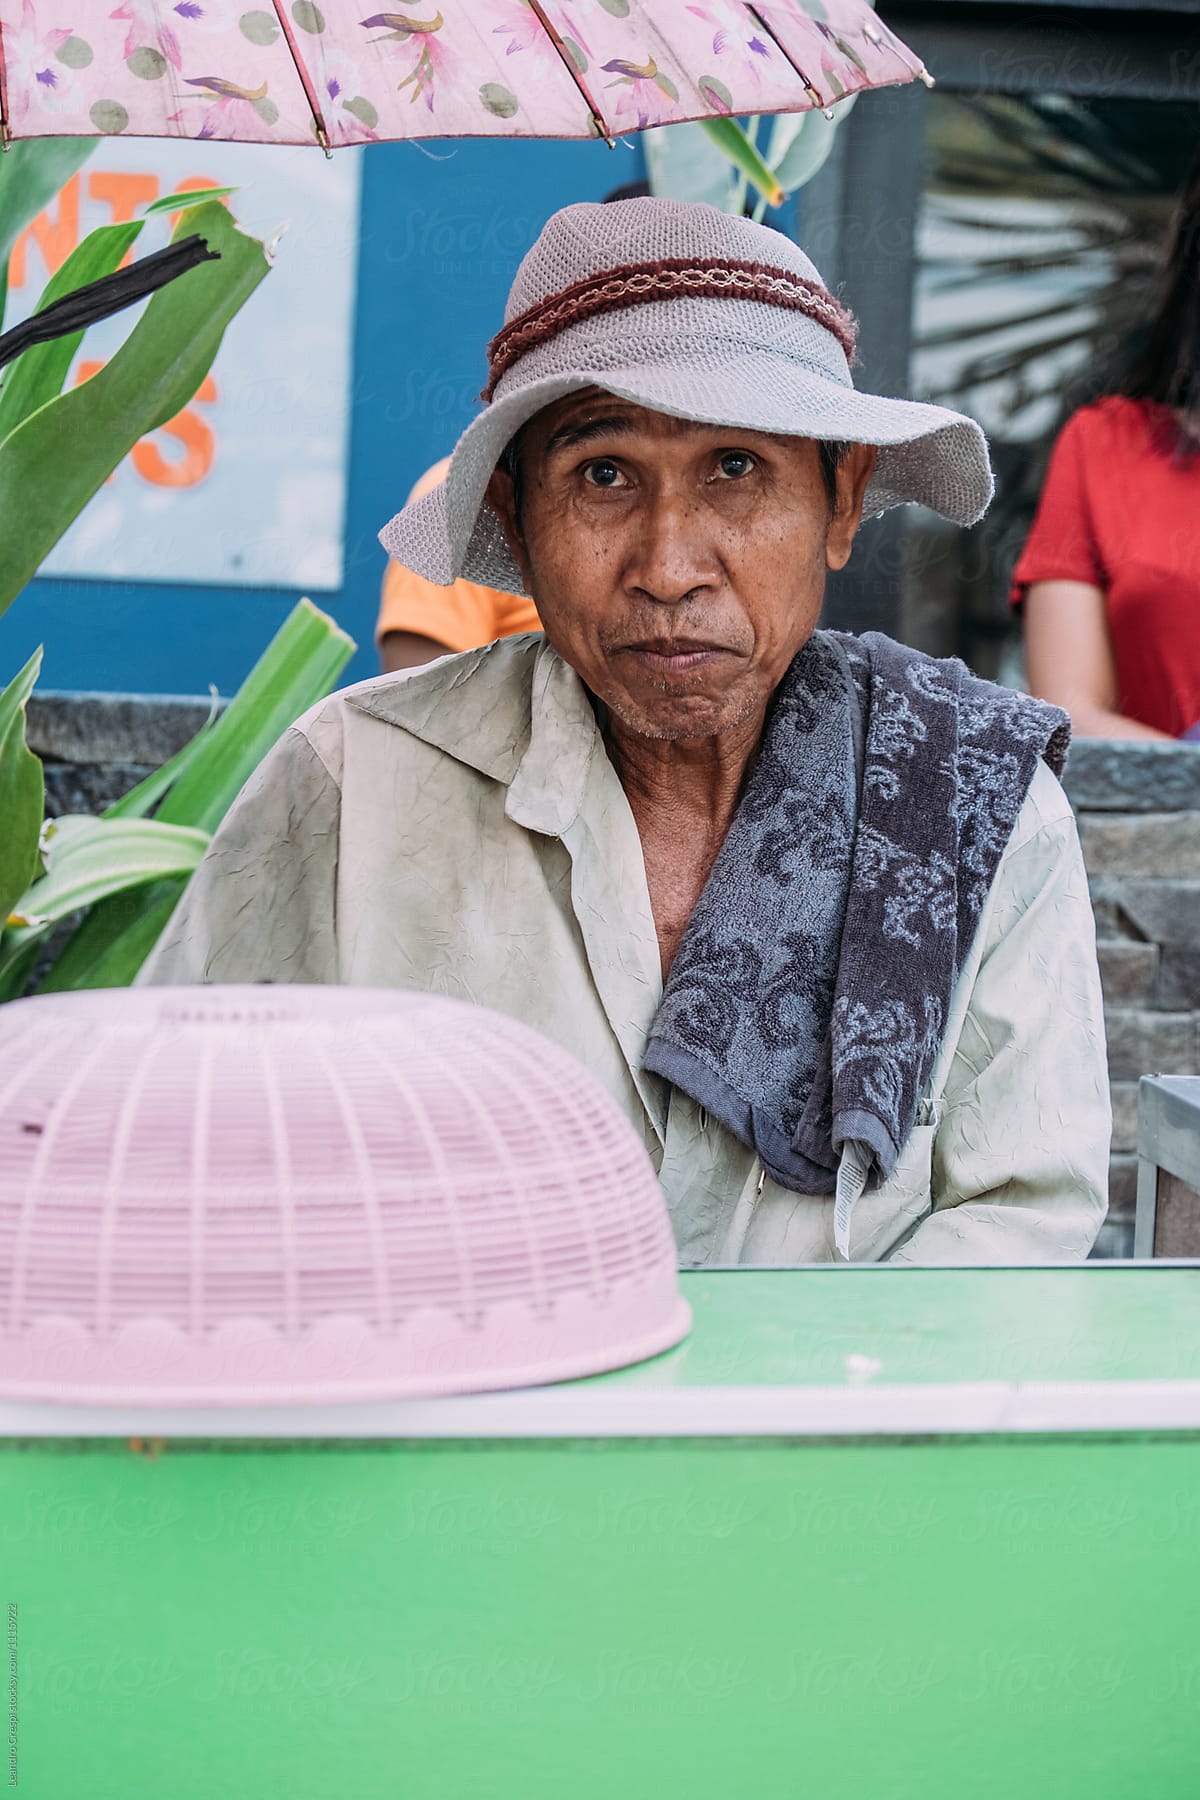 Indonesian old man preparing and selling typical food on the street